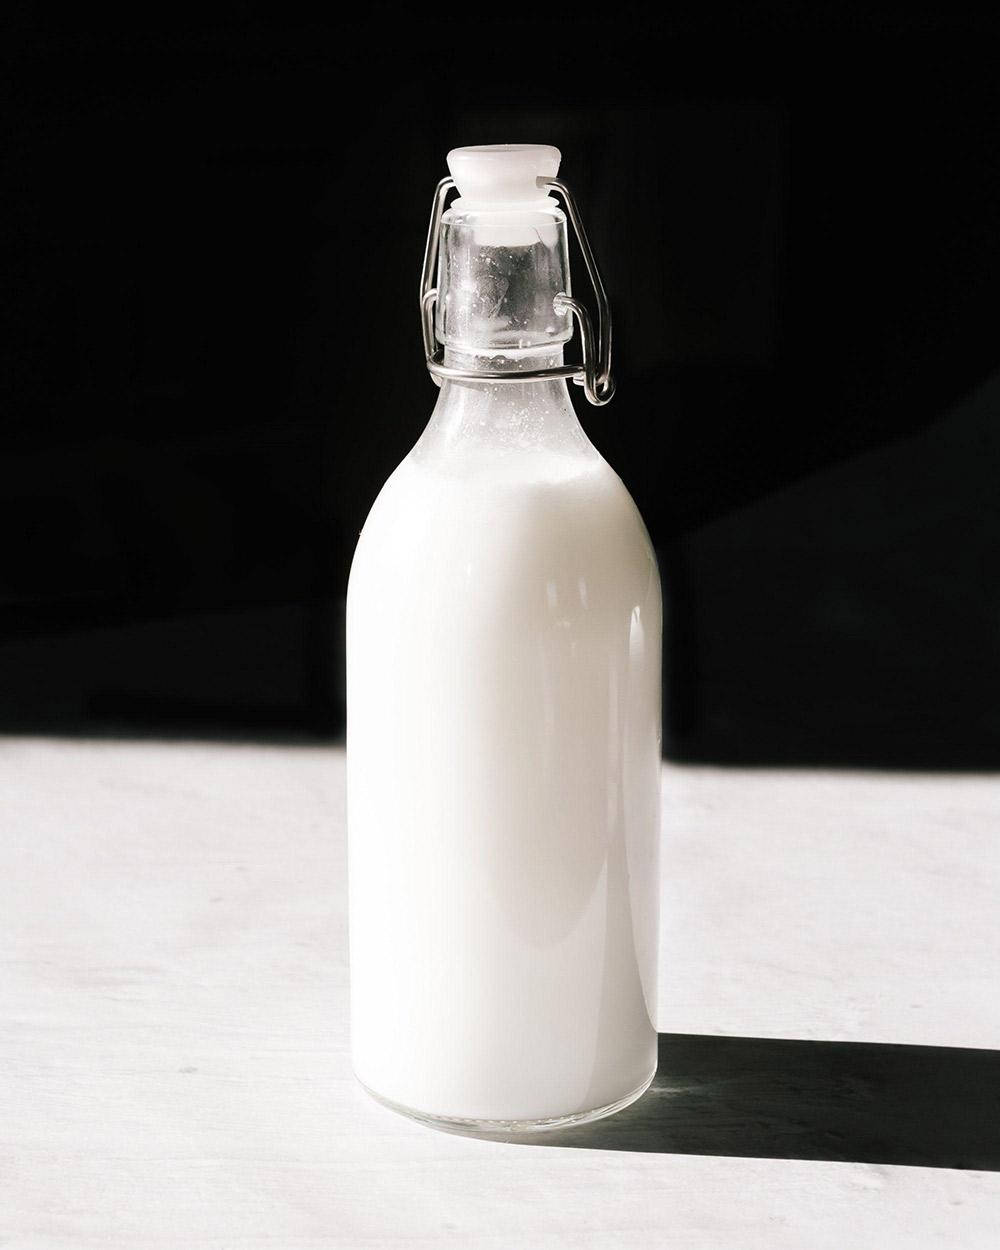 Glass jar of white liquid on a white counter with black background.